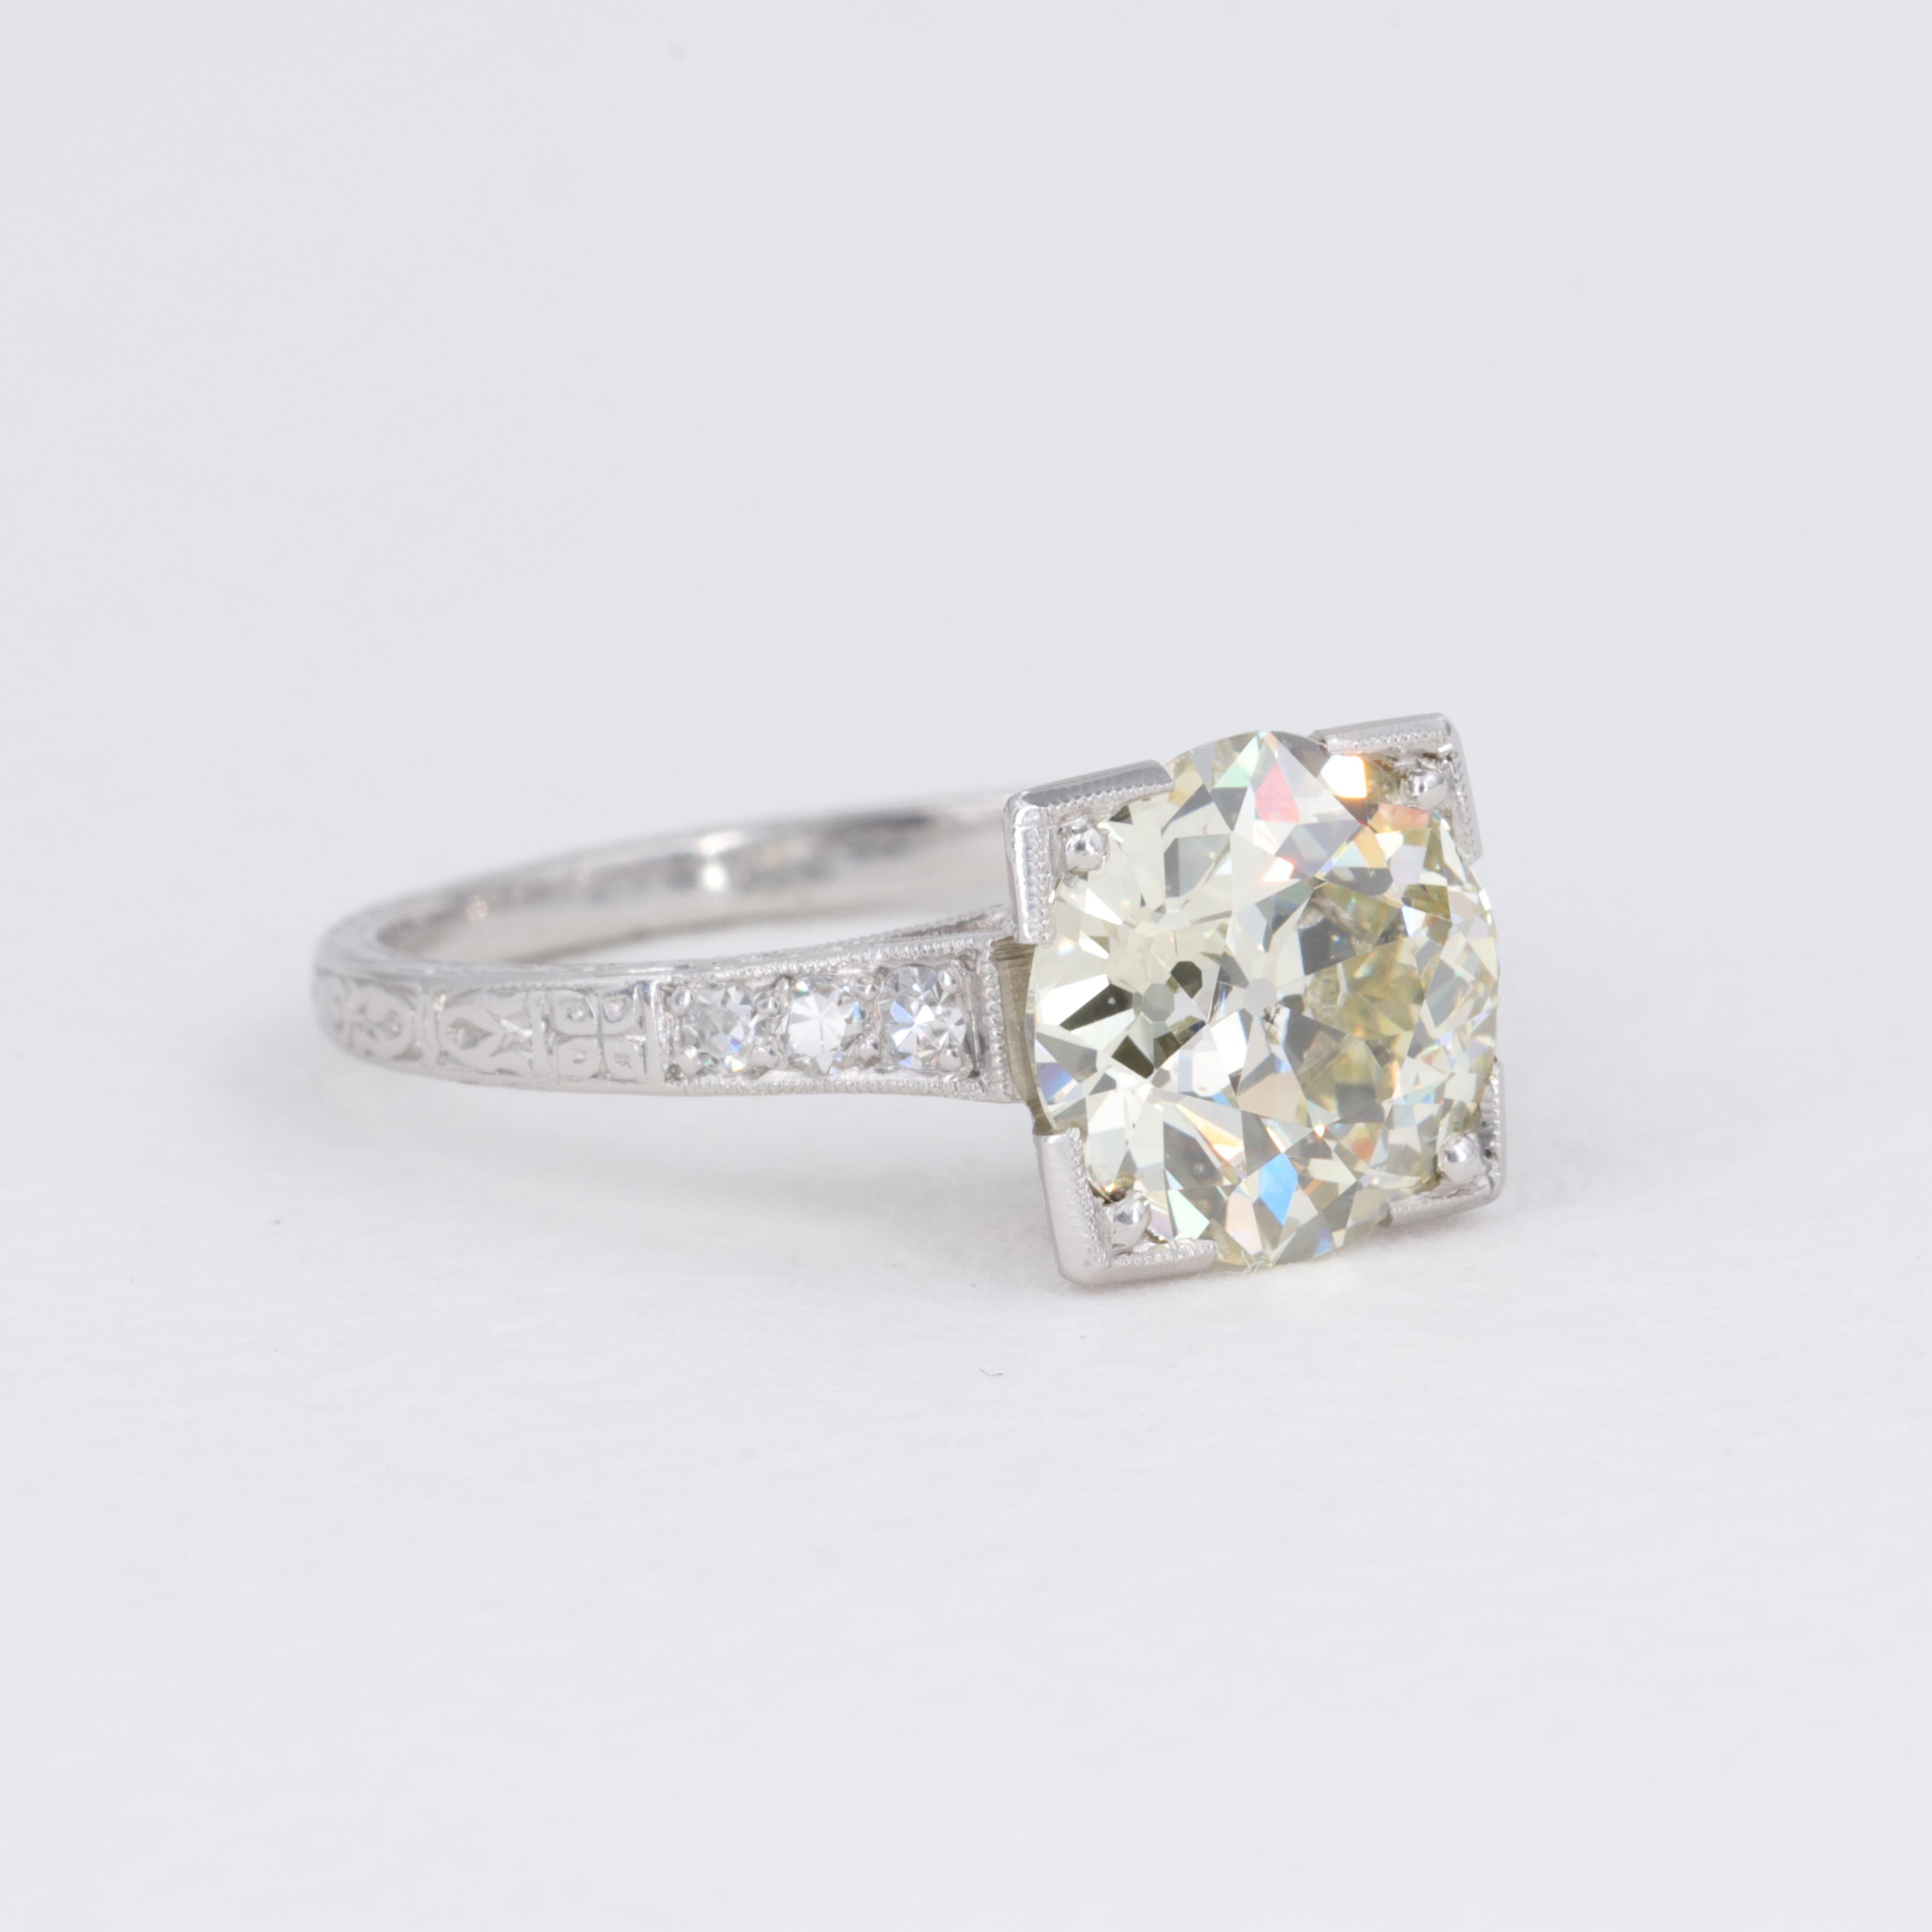 2.68 Carat GIA Old European Cut Diamond Platinum Deco Engagement Ring In Good Condition For Sale In Tampa, FL